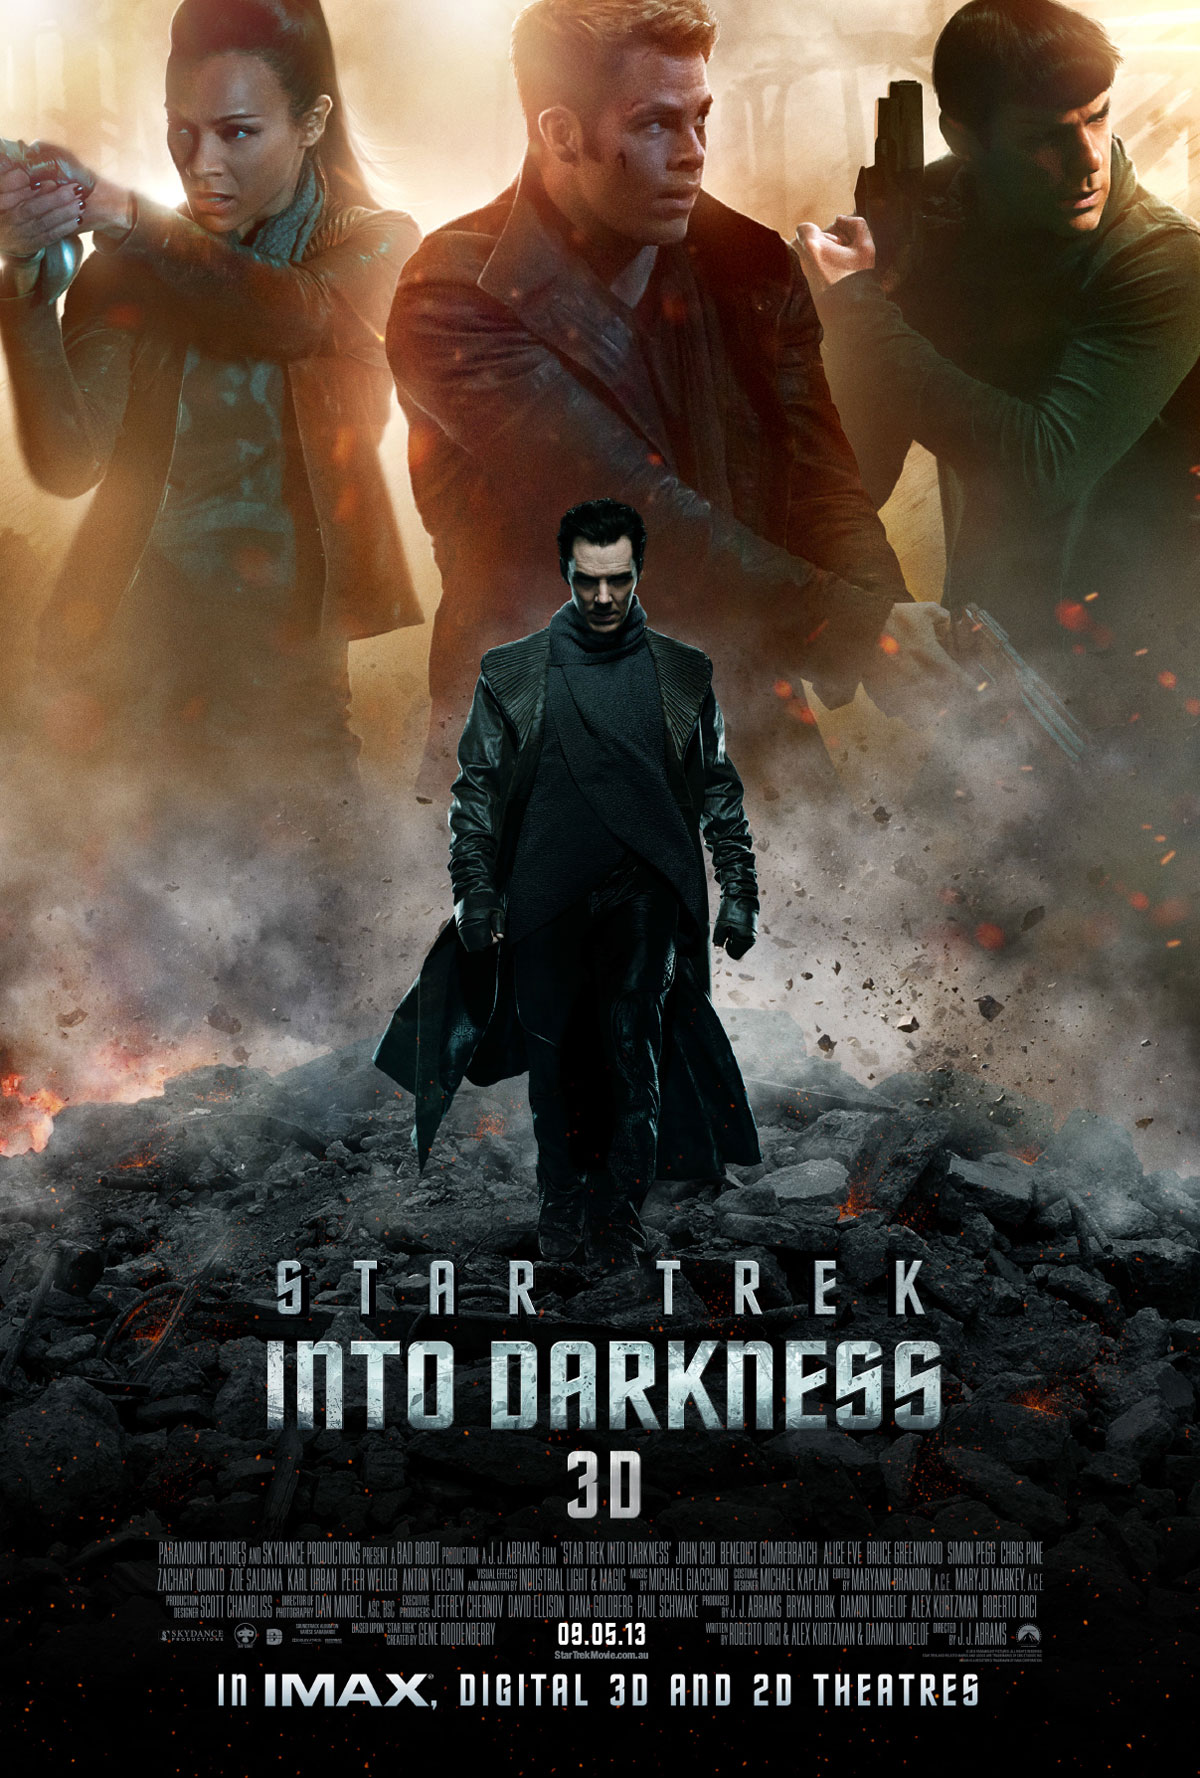 Star Trek Into Darkness An Action Film in a Space Suit Void of the